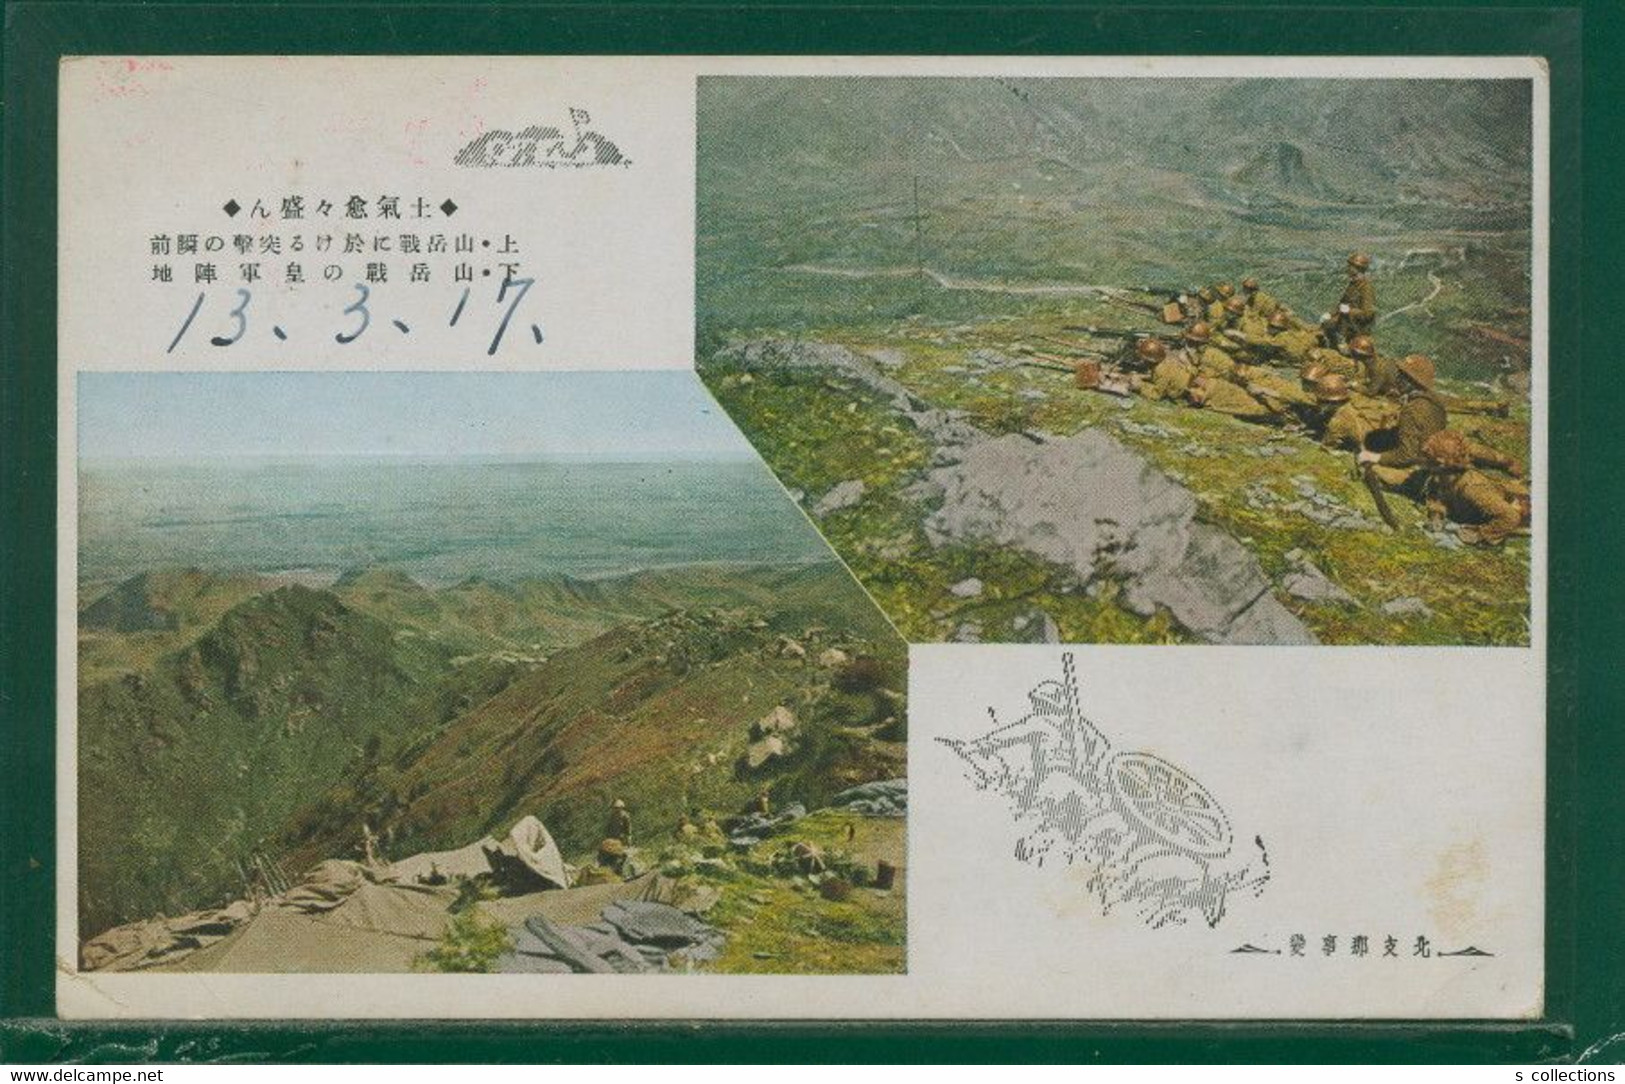 JAPAN WWII Military Battlefield Picture Postcard North China WW2 JAPON GIAPPONE - 1941-45 Chine Du Nord